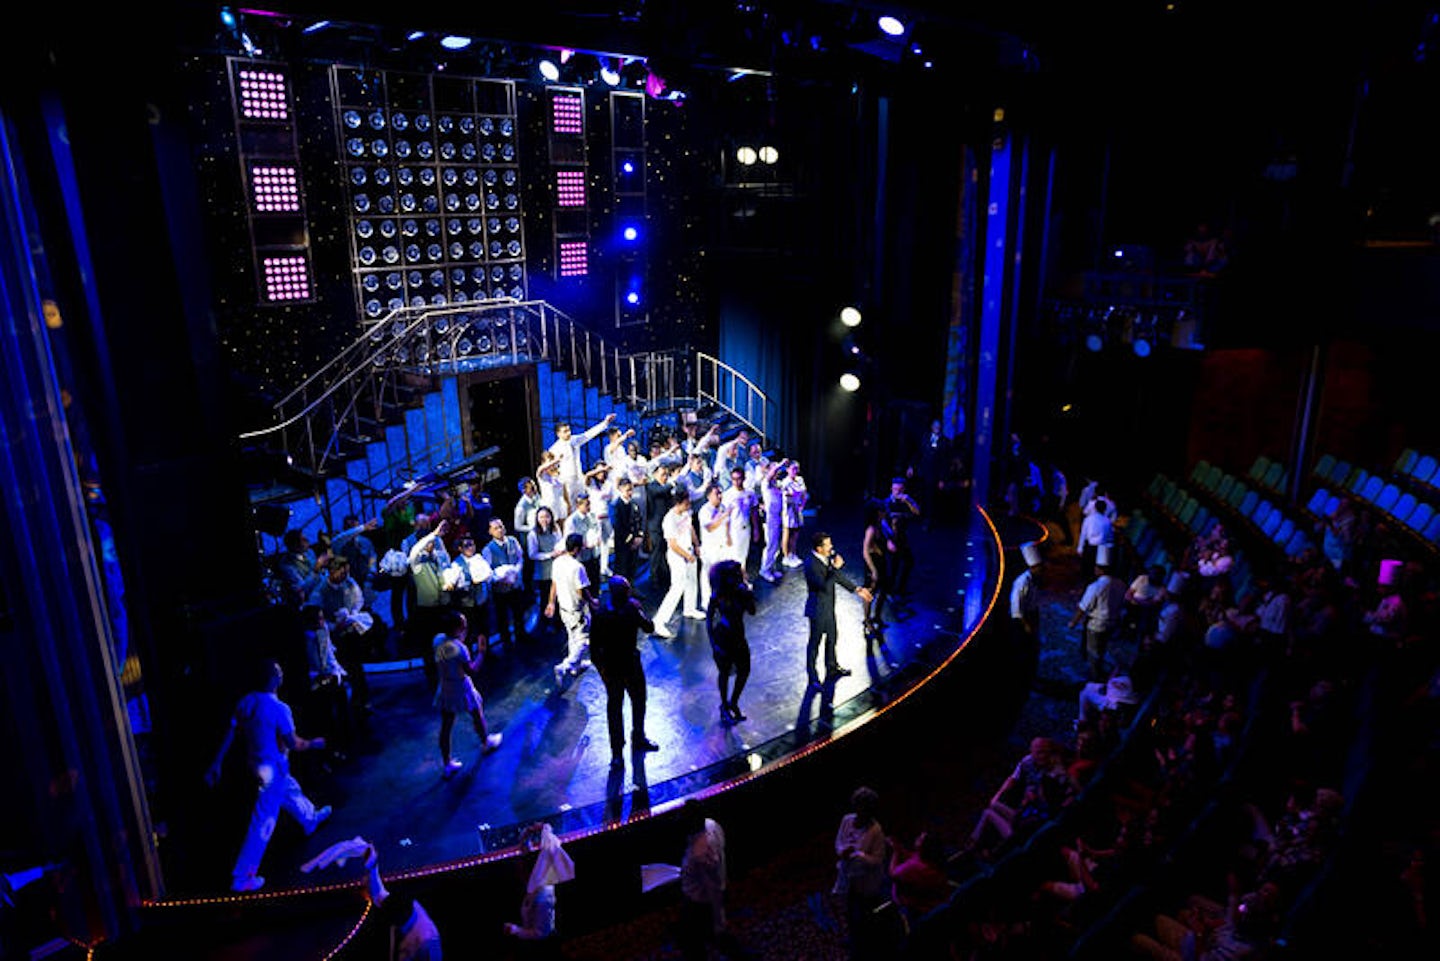 "Farewell Show" at Stardust Theater on Norwegian Pearl